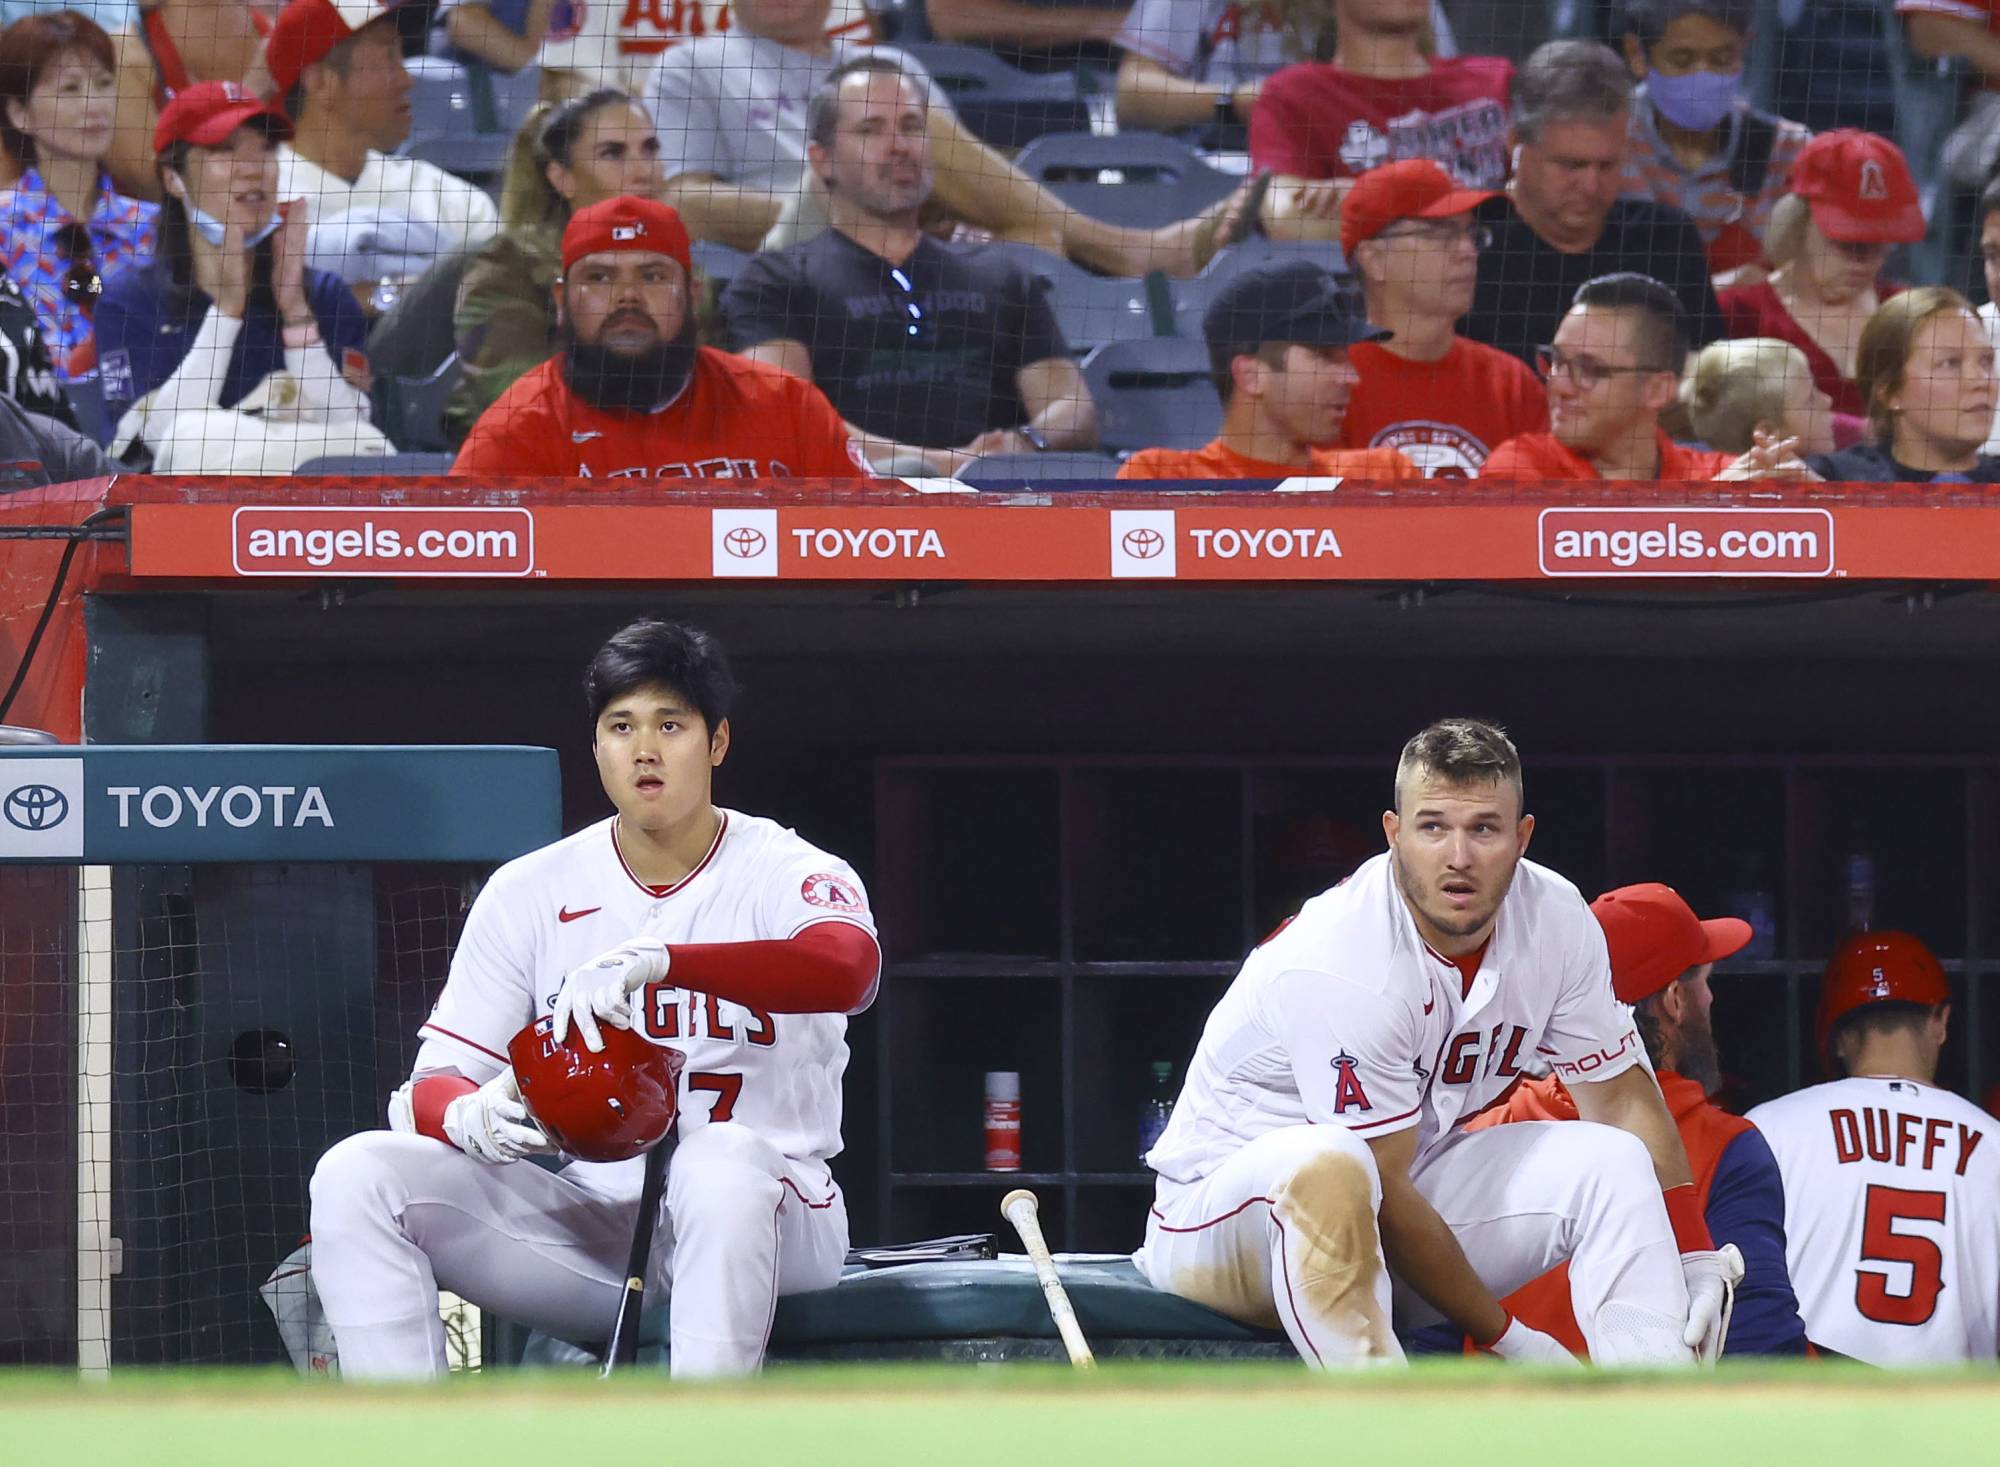 Phil Nevin out as Angels manager after missing playoffs again with Shohei  Ohtani, Mike Trout 